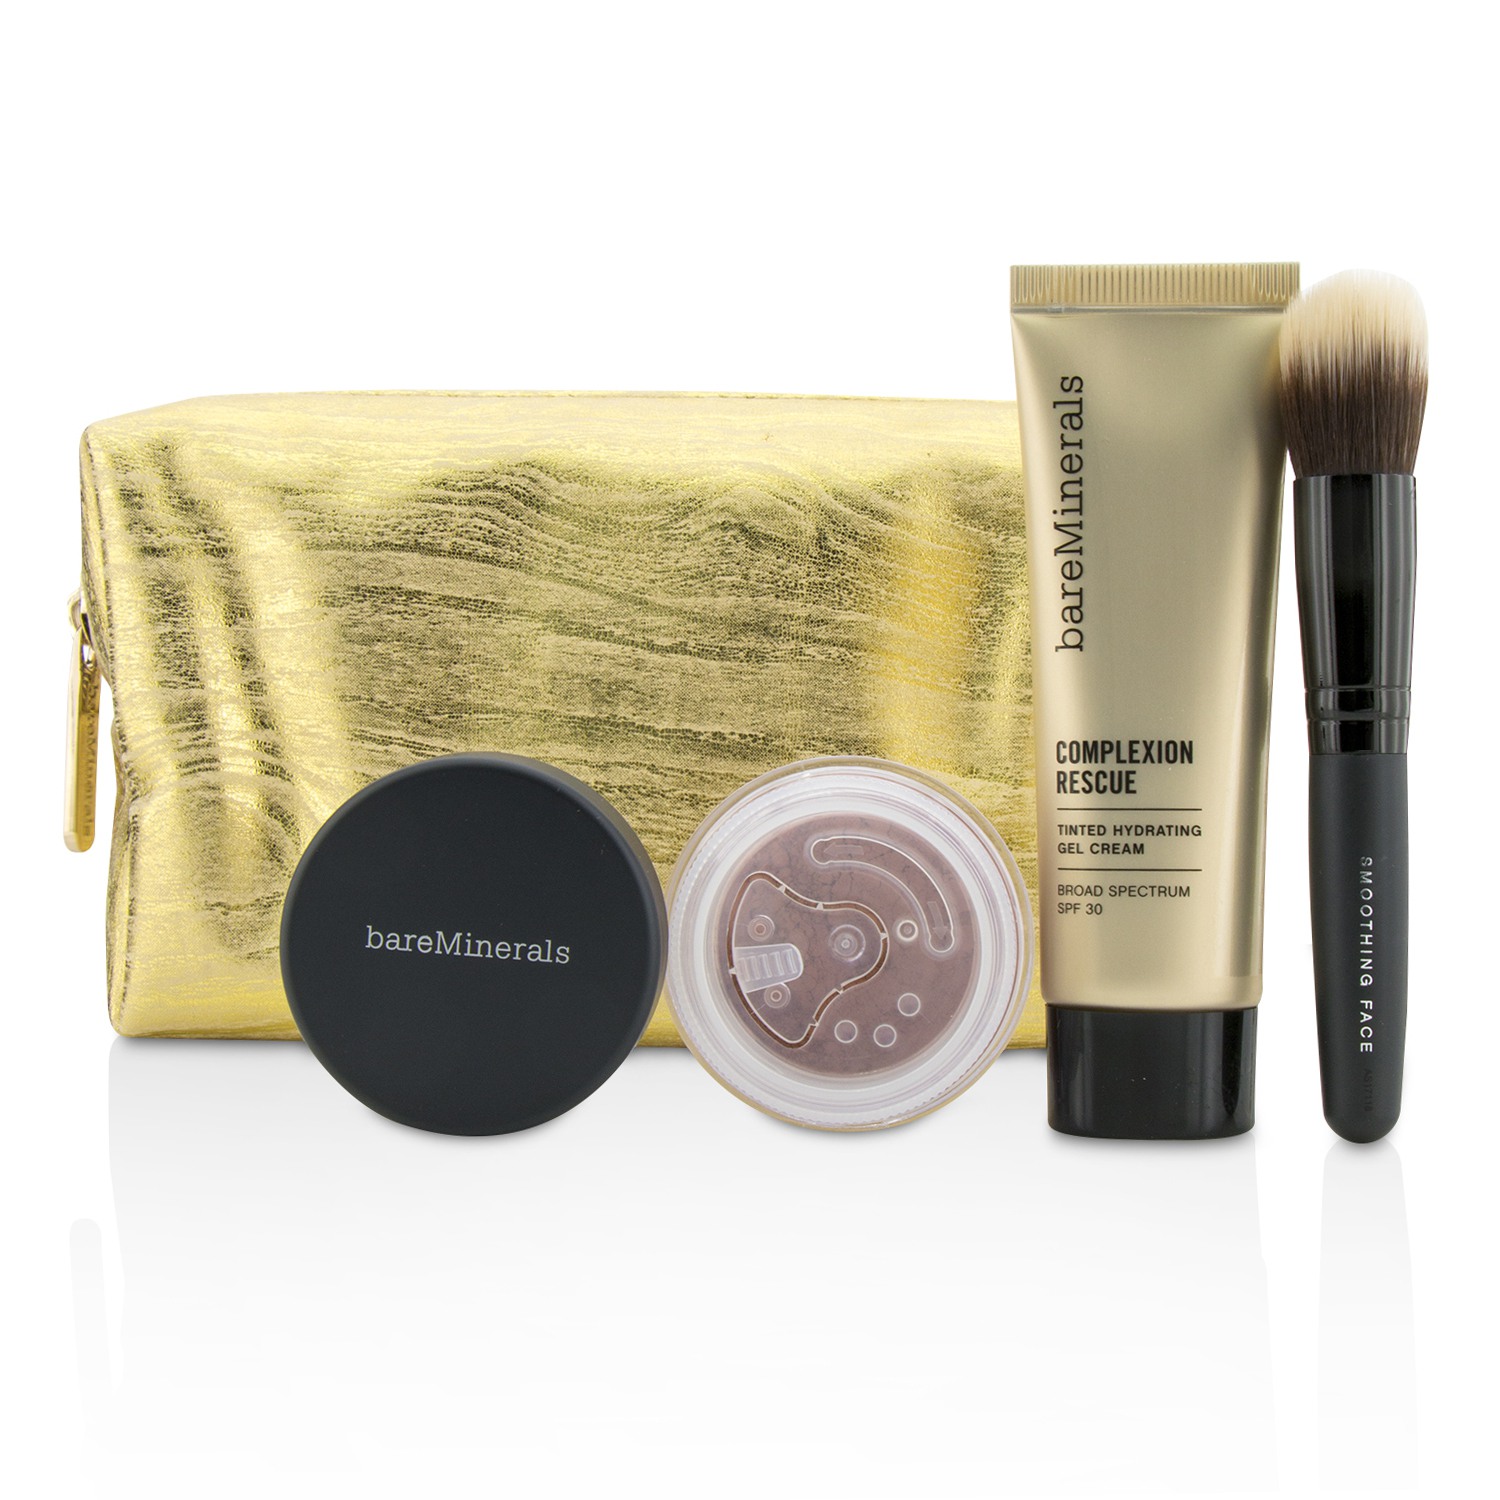 Take Me With You Complexion Rescue Try Me Set - # 02 Vanilla BareMinerals Image